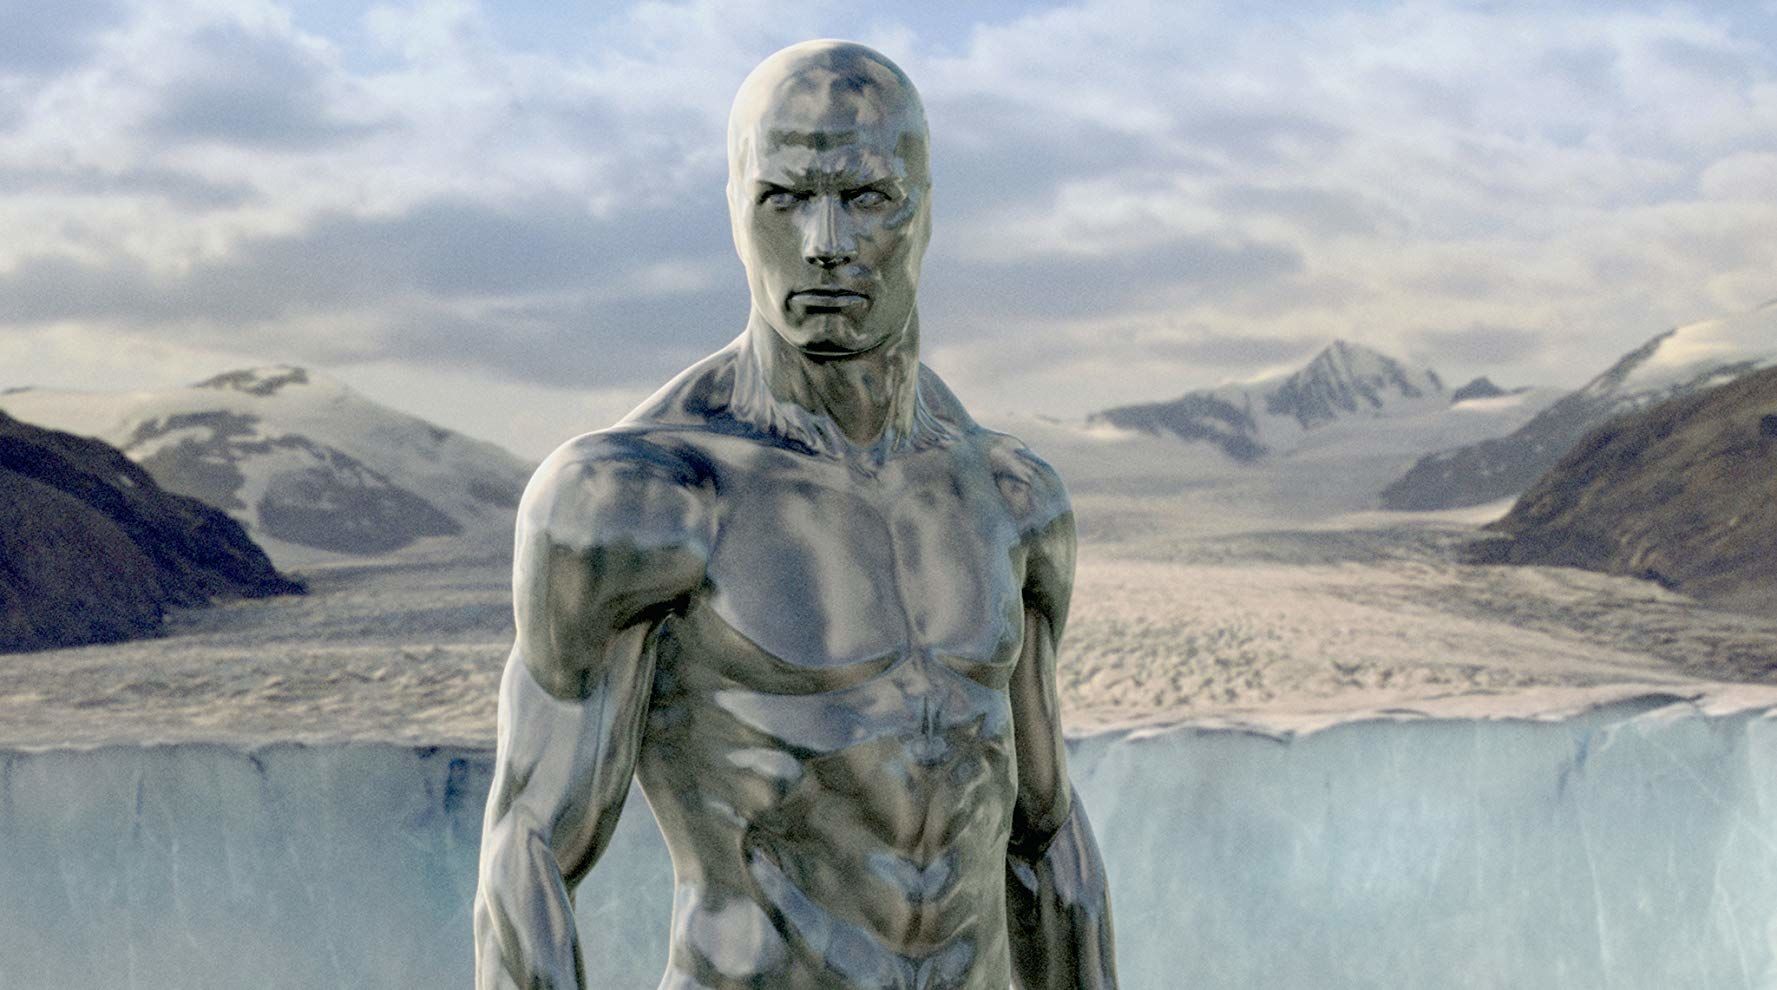 Silver Surfer in 4: Rise of the Silver Surfer